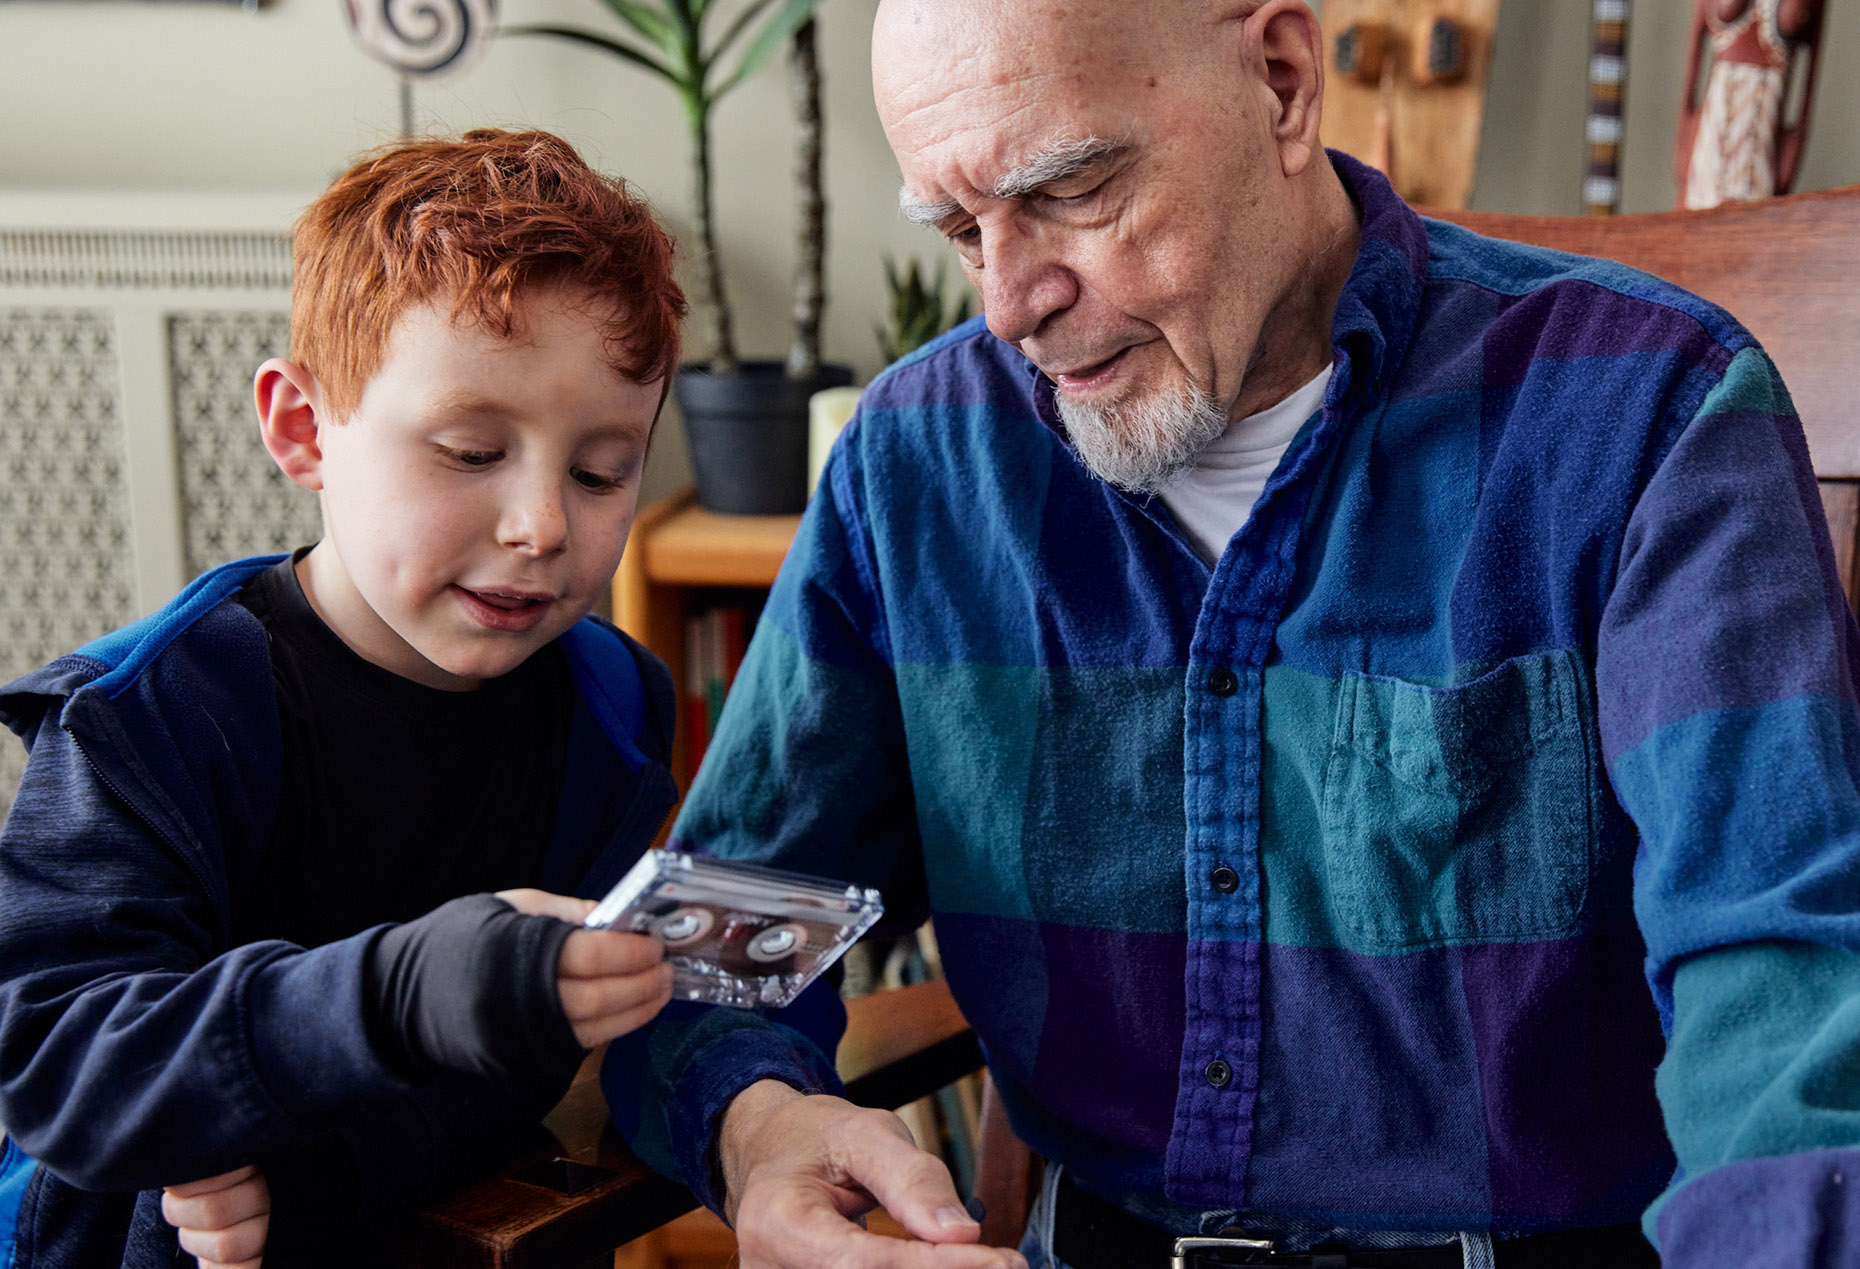 Boy showing a older person casette tape | Childrens photography by Saverio Truglia